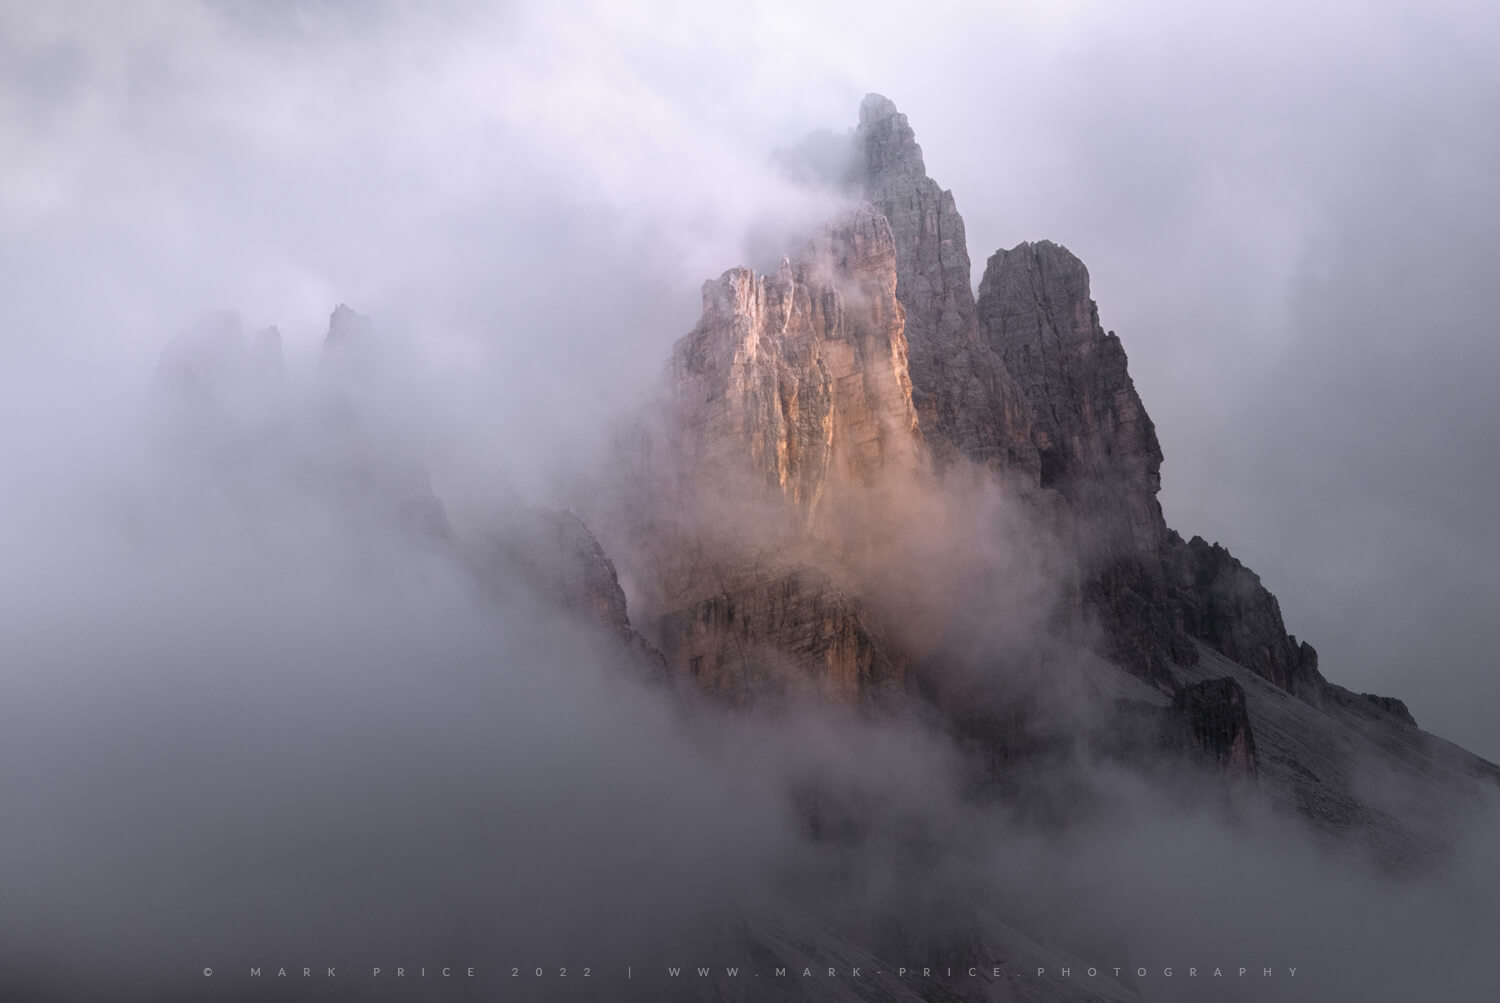 Light and cloud combined with endlessly vertical rock create a moment in Italy